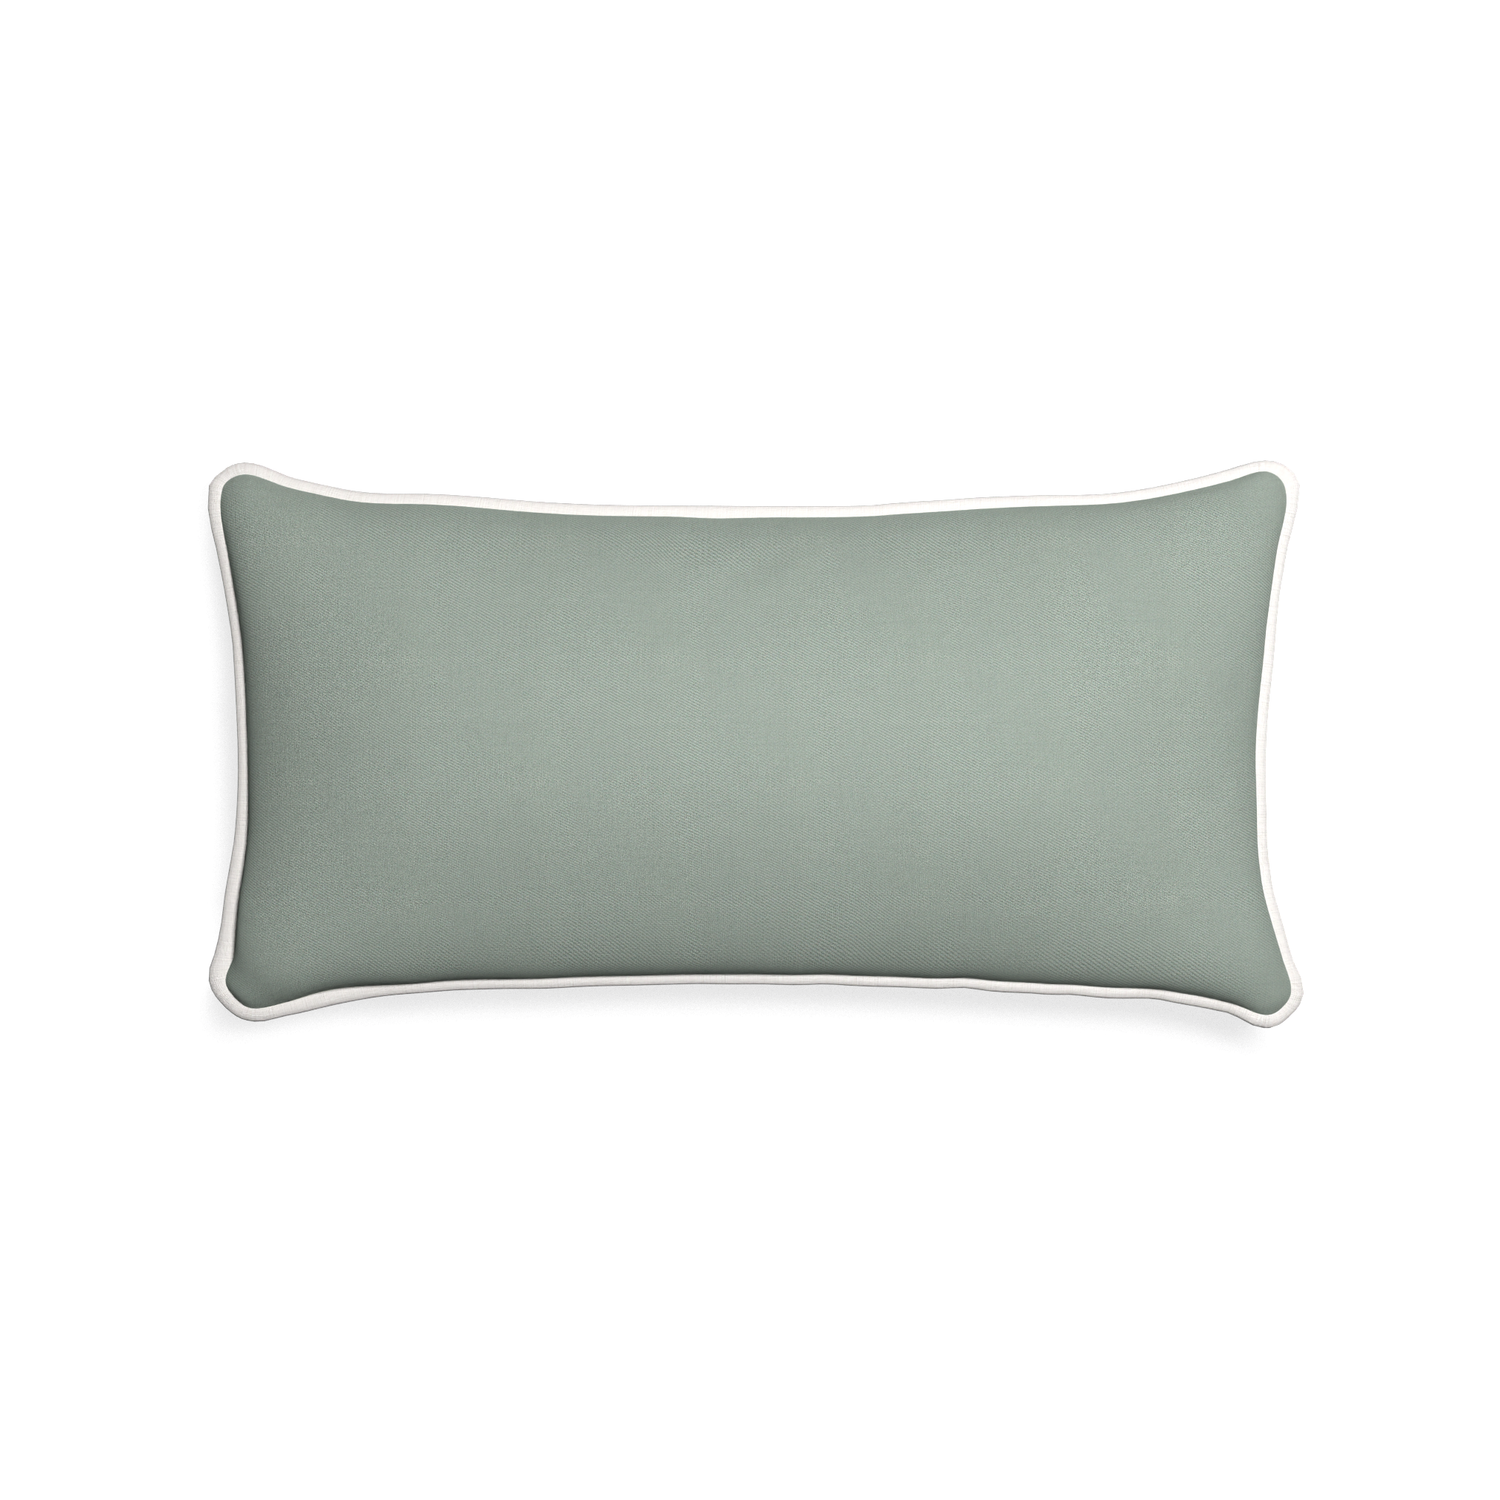 Midi-lumbar sage custom sage green cottonpillow with snow piping on white background